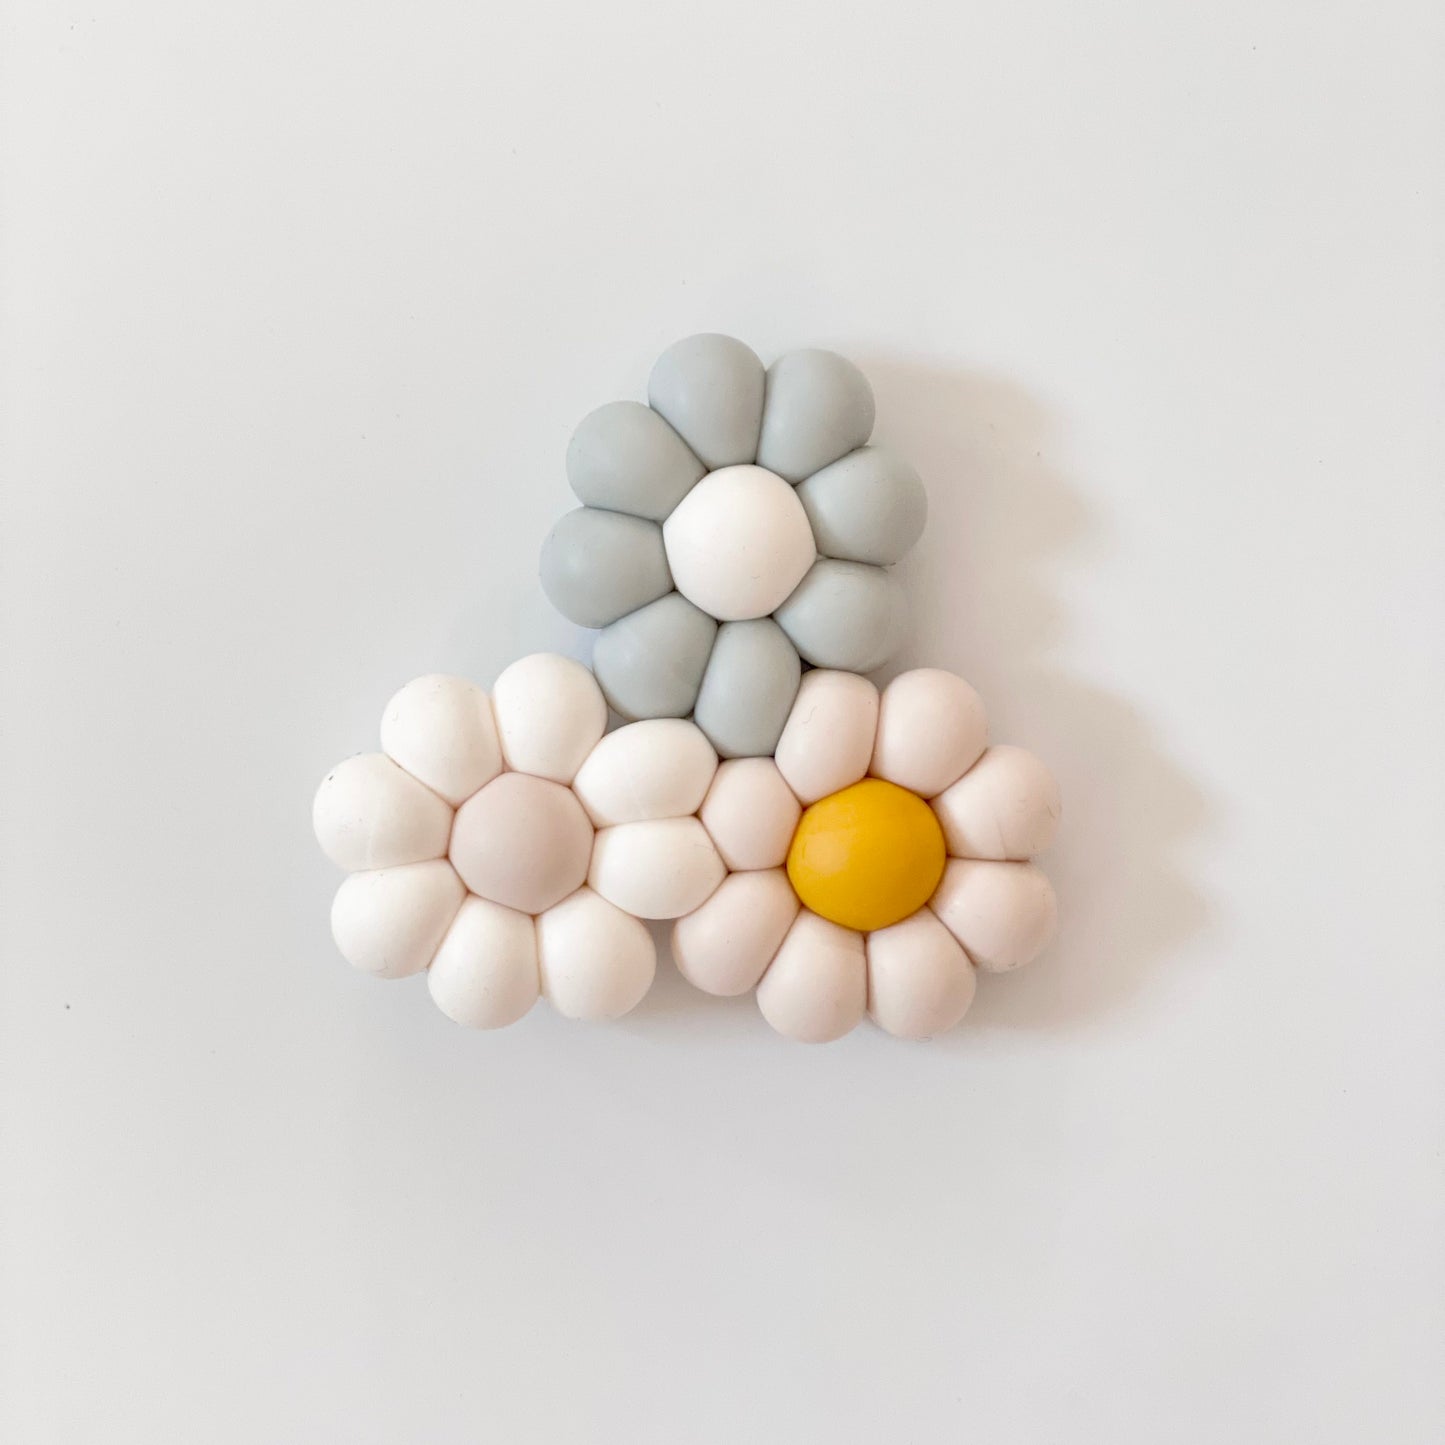 Daisy Silicone Teether